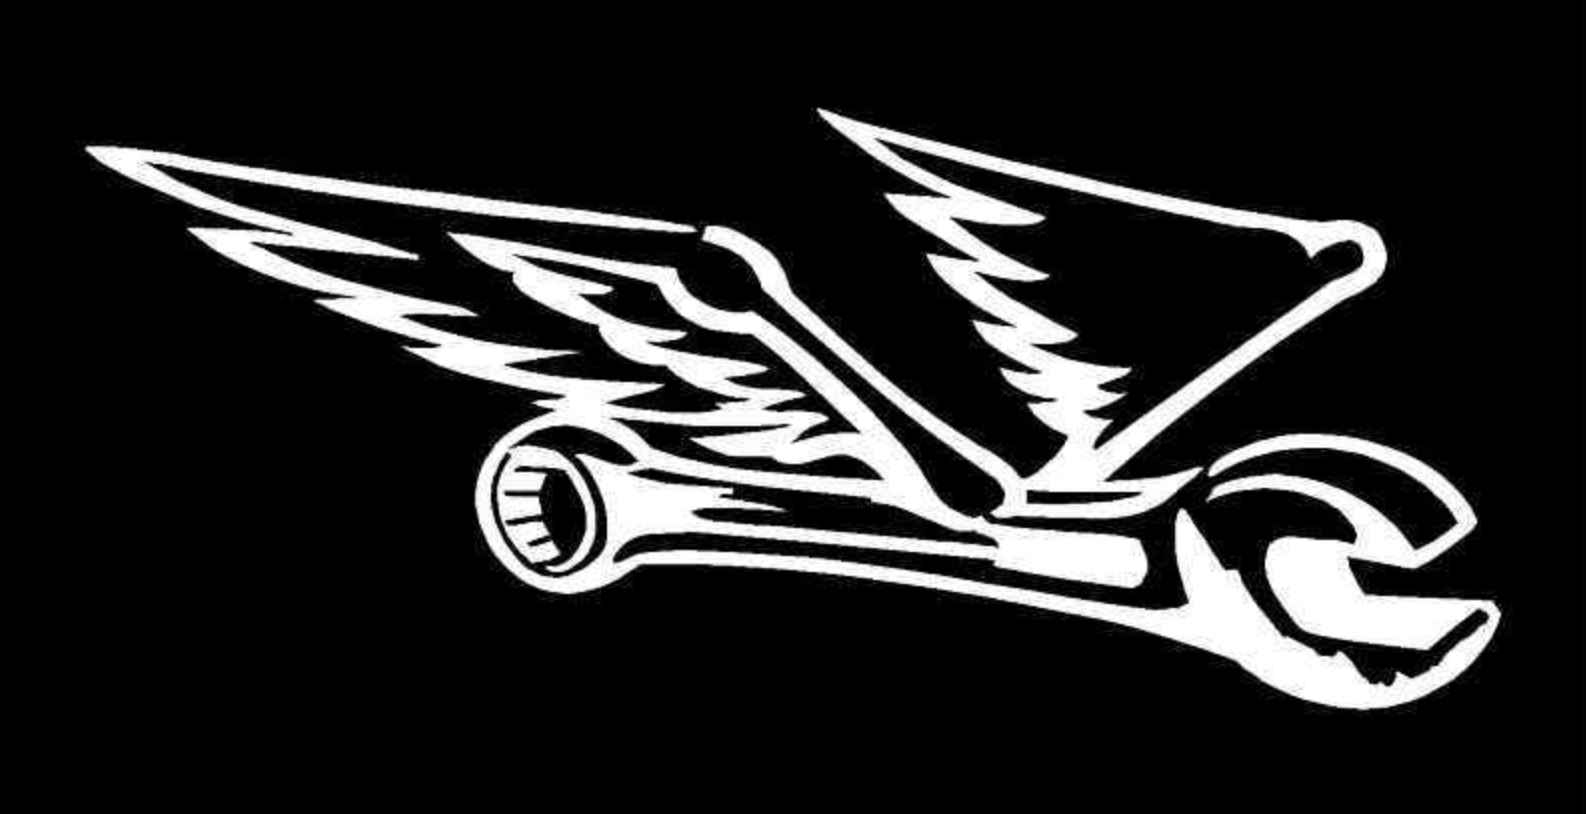 The Flying Wrench logo... a flying box end wrench with wings